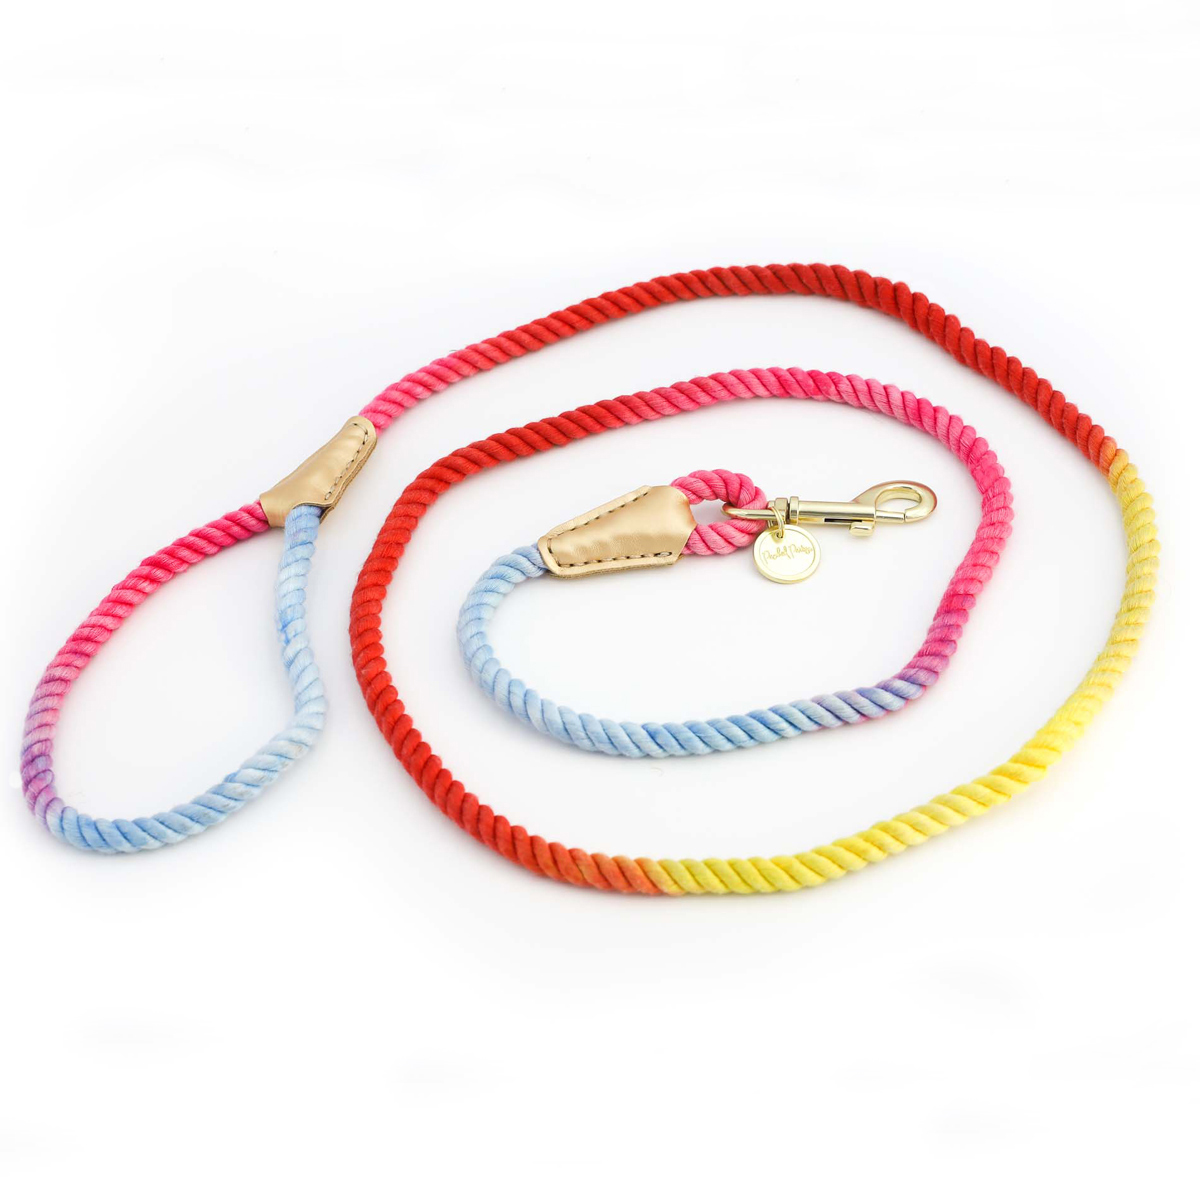 Packed Party Hold It! Rainbow Rope Dog Leash - image 3 of 8